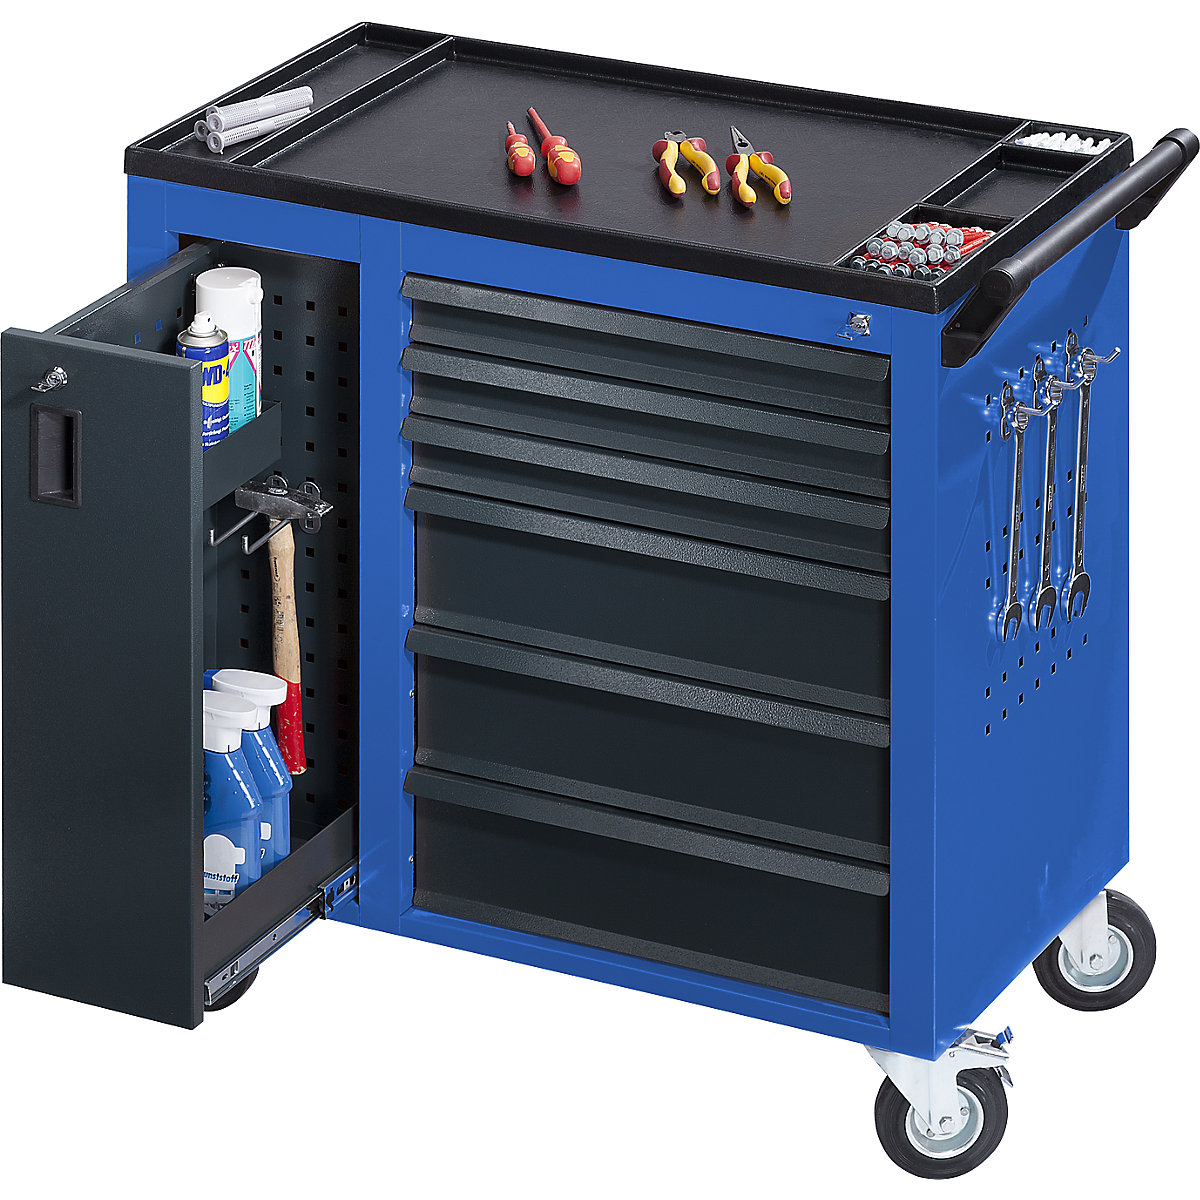 JUMBO workshop trolley – eurokraft pro, with vertical drawers and 6 drawers, HxWxD 935 x 900 x 460 mm, gentian blue-9